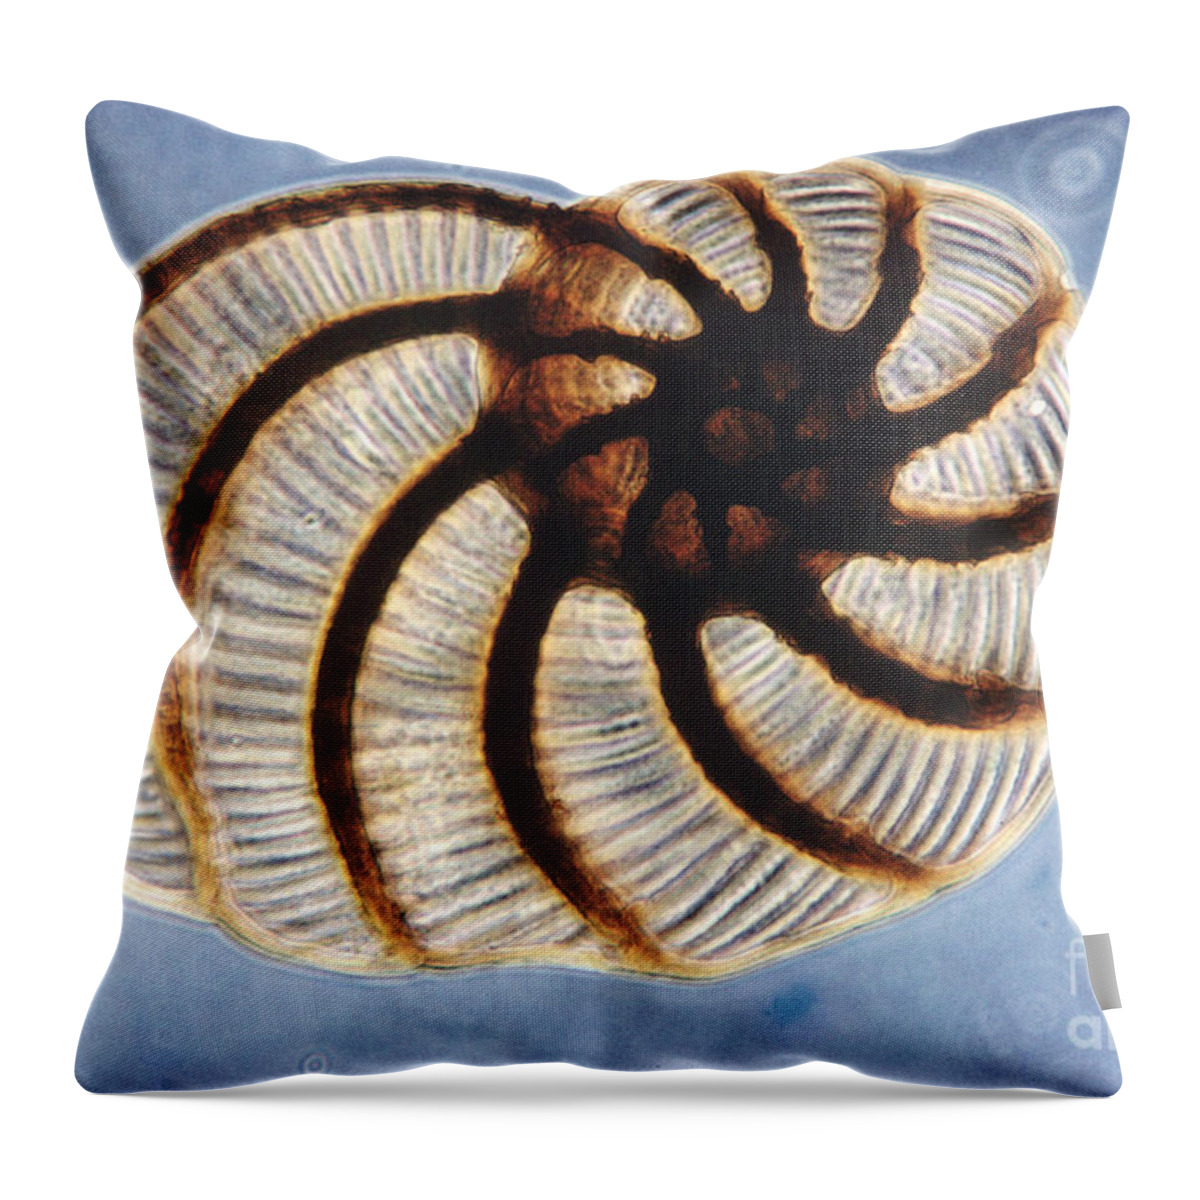 Micrograph Throw Pillow featuring the photograph Foraminifera by Eric V. Grave